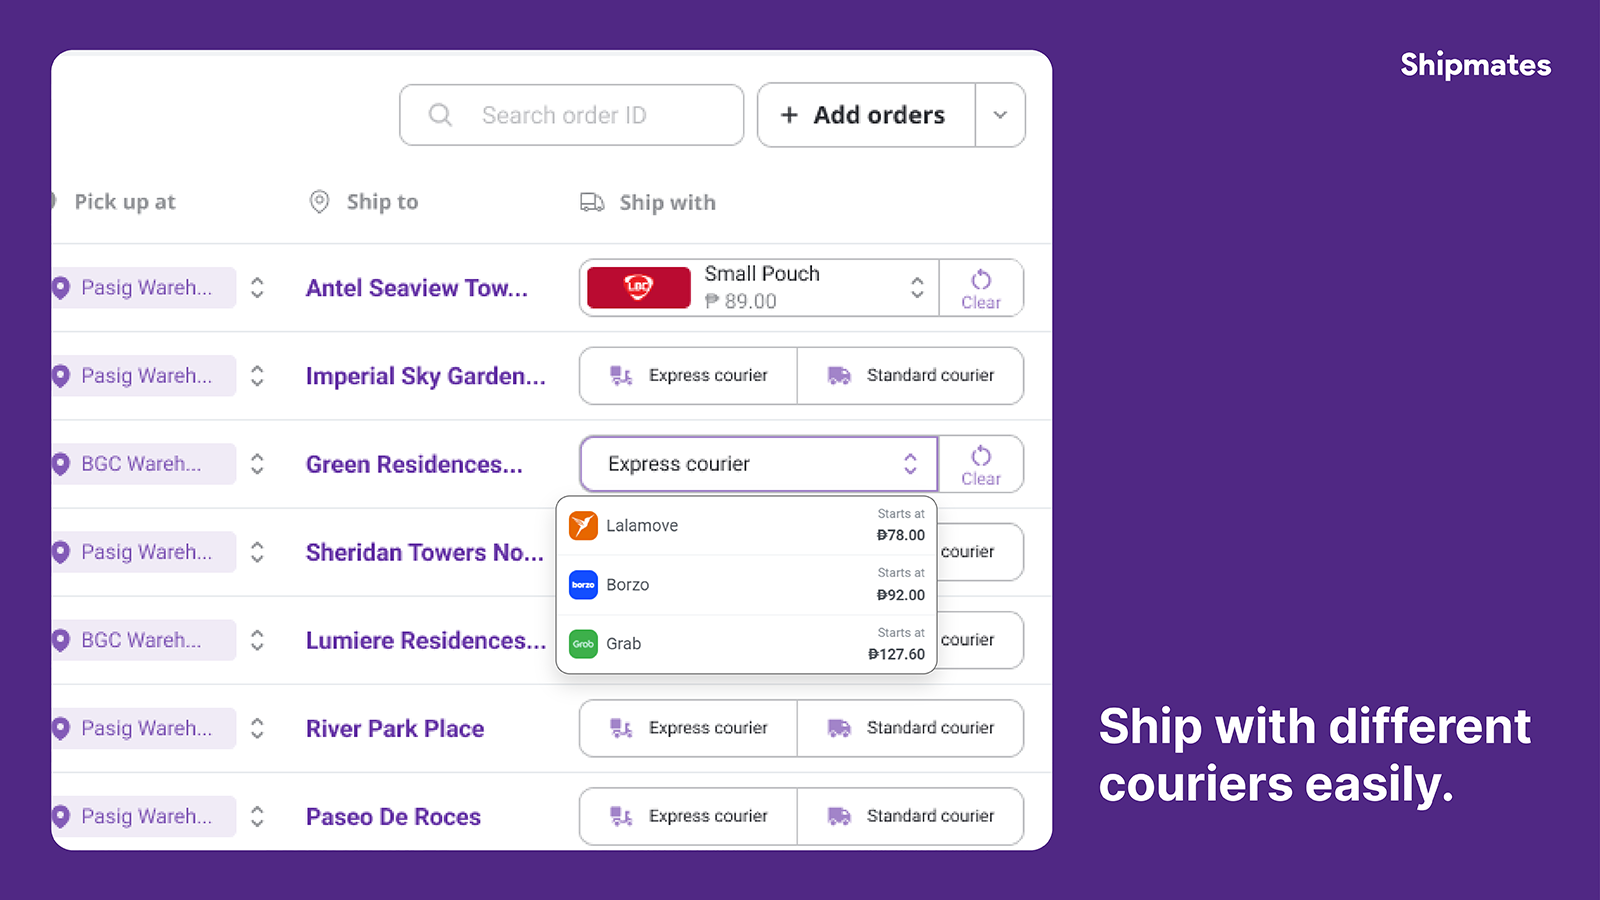 Ship with different couriers easily.